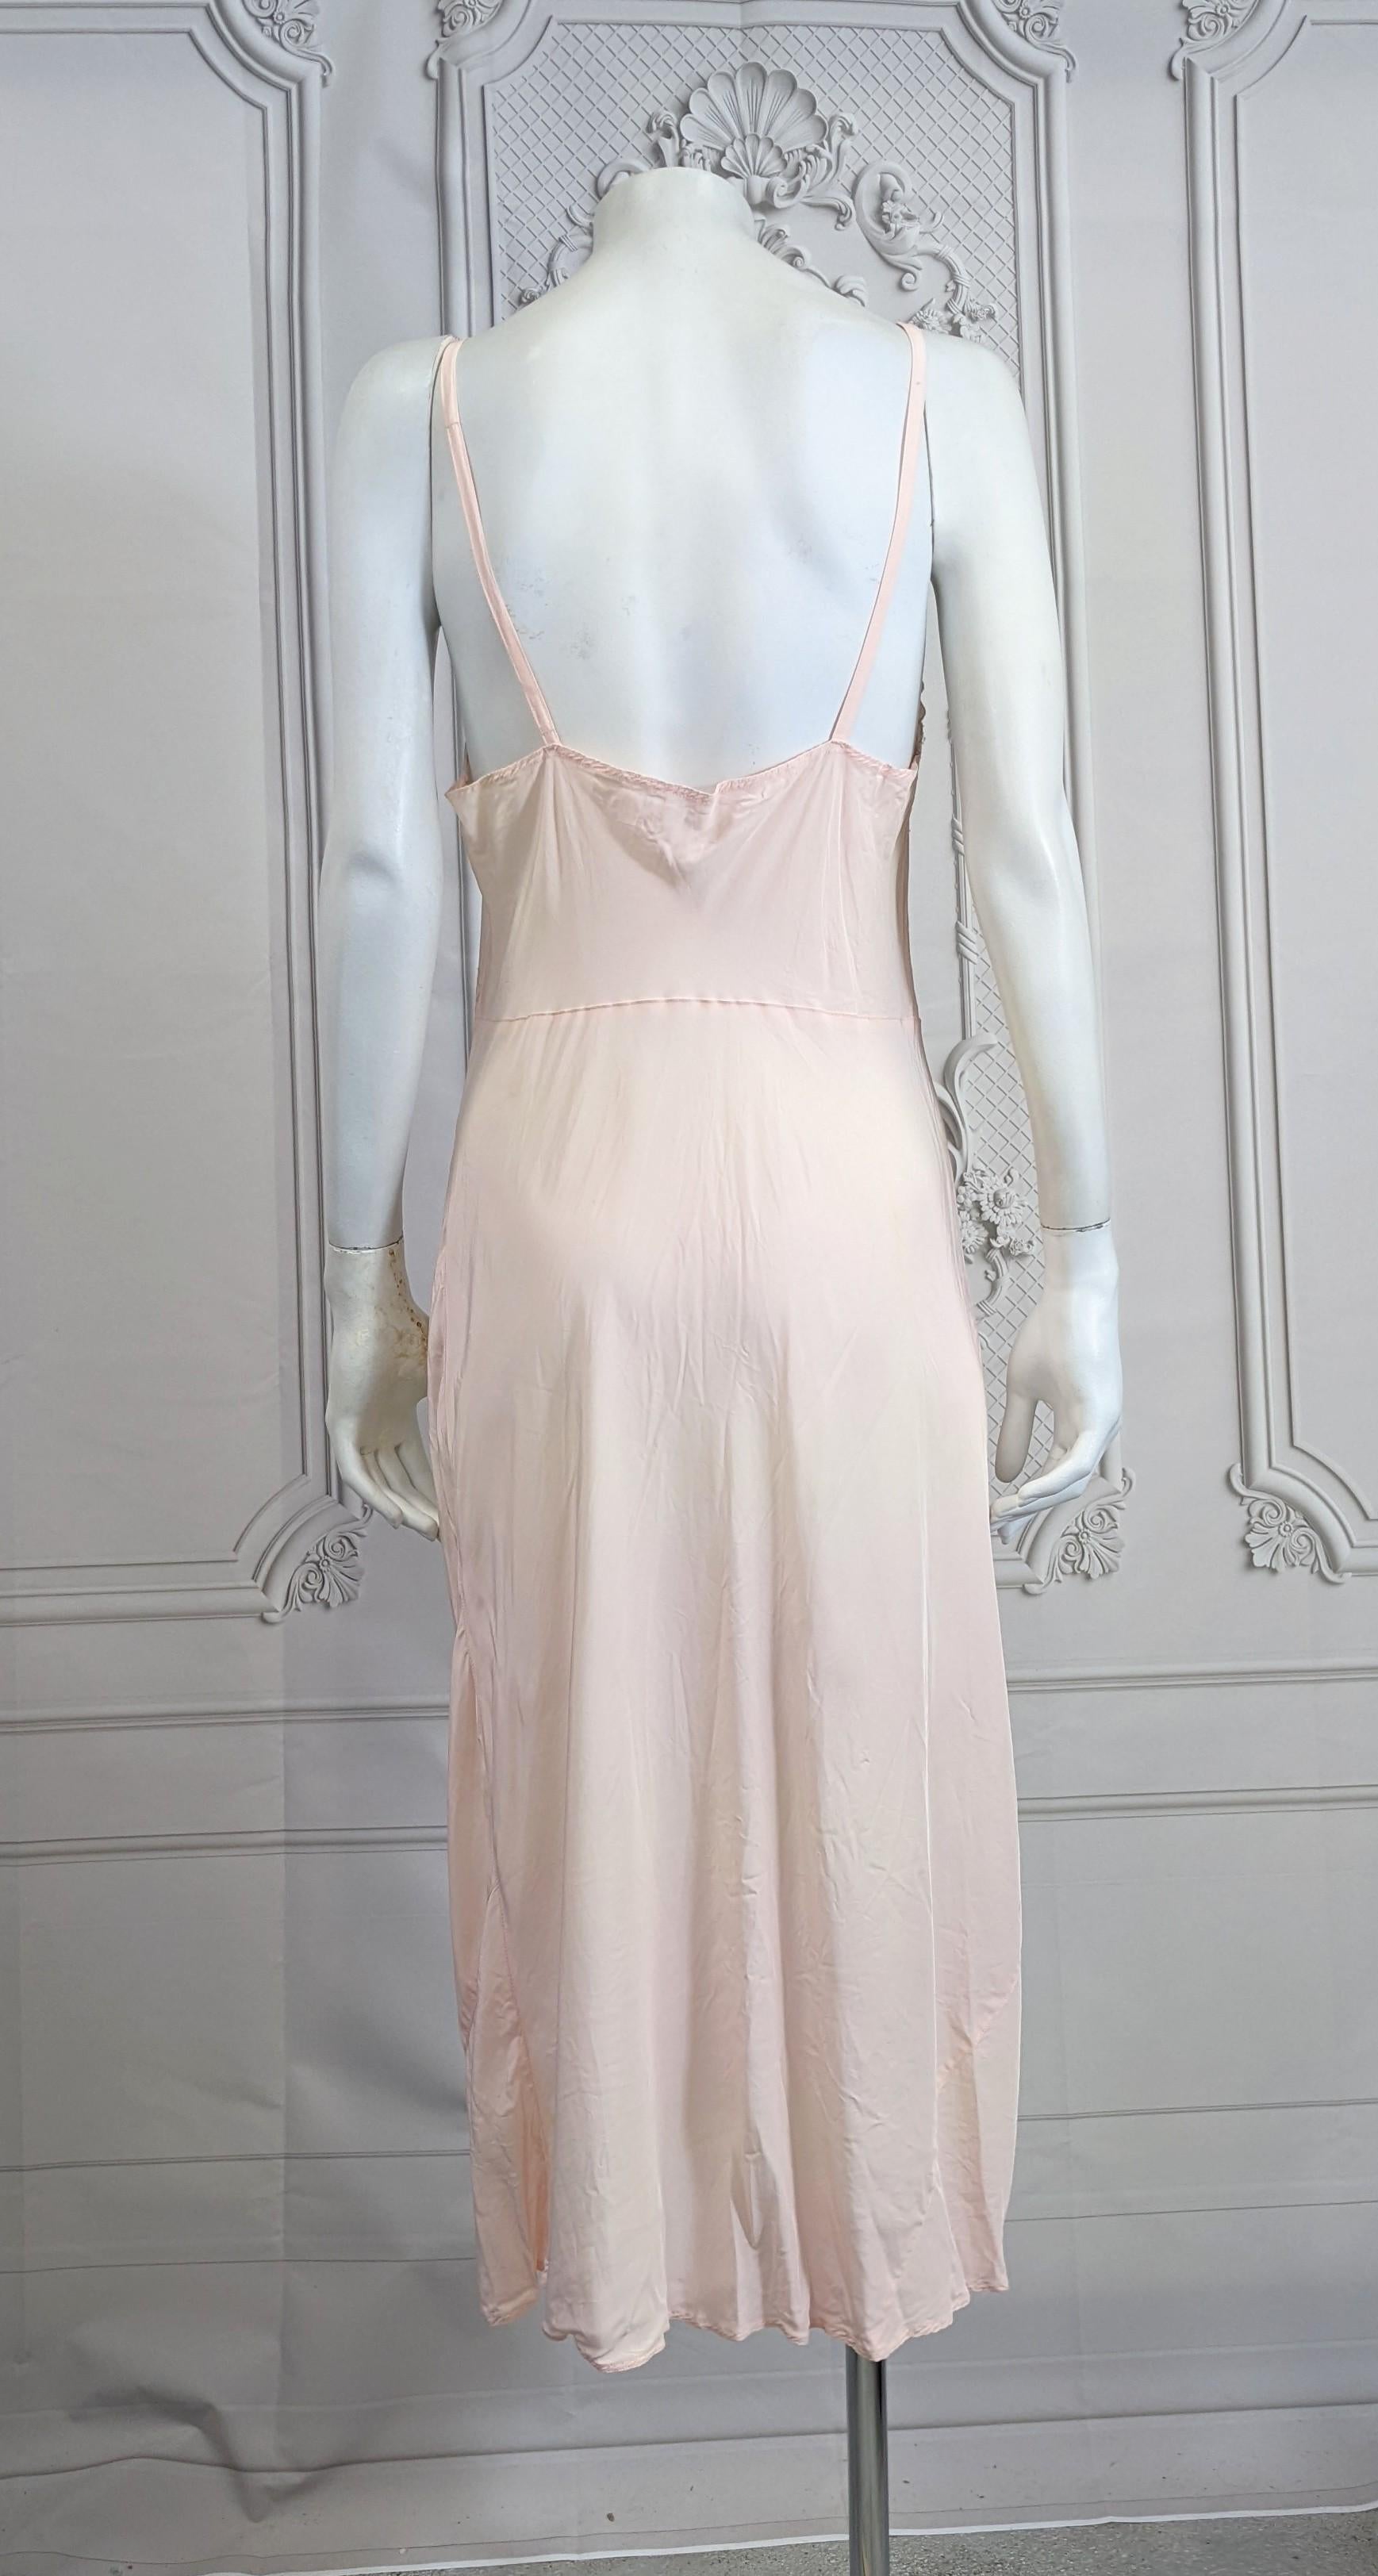 Art Deco Slip Dress, Upcycled Studio VL In Good Condition For Sale In New York, NY